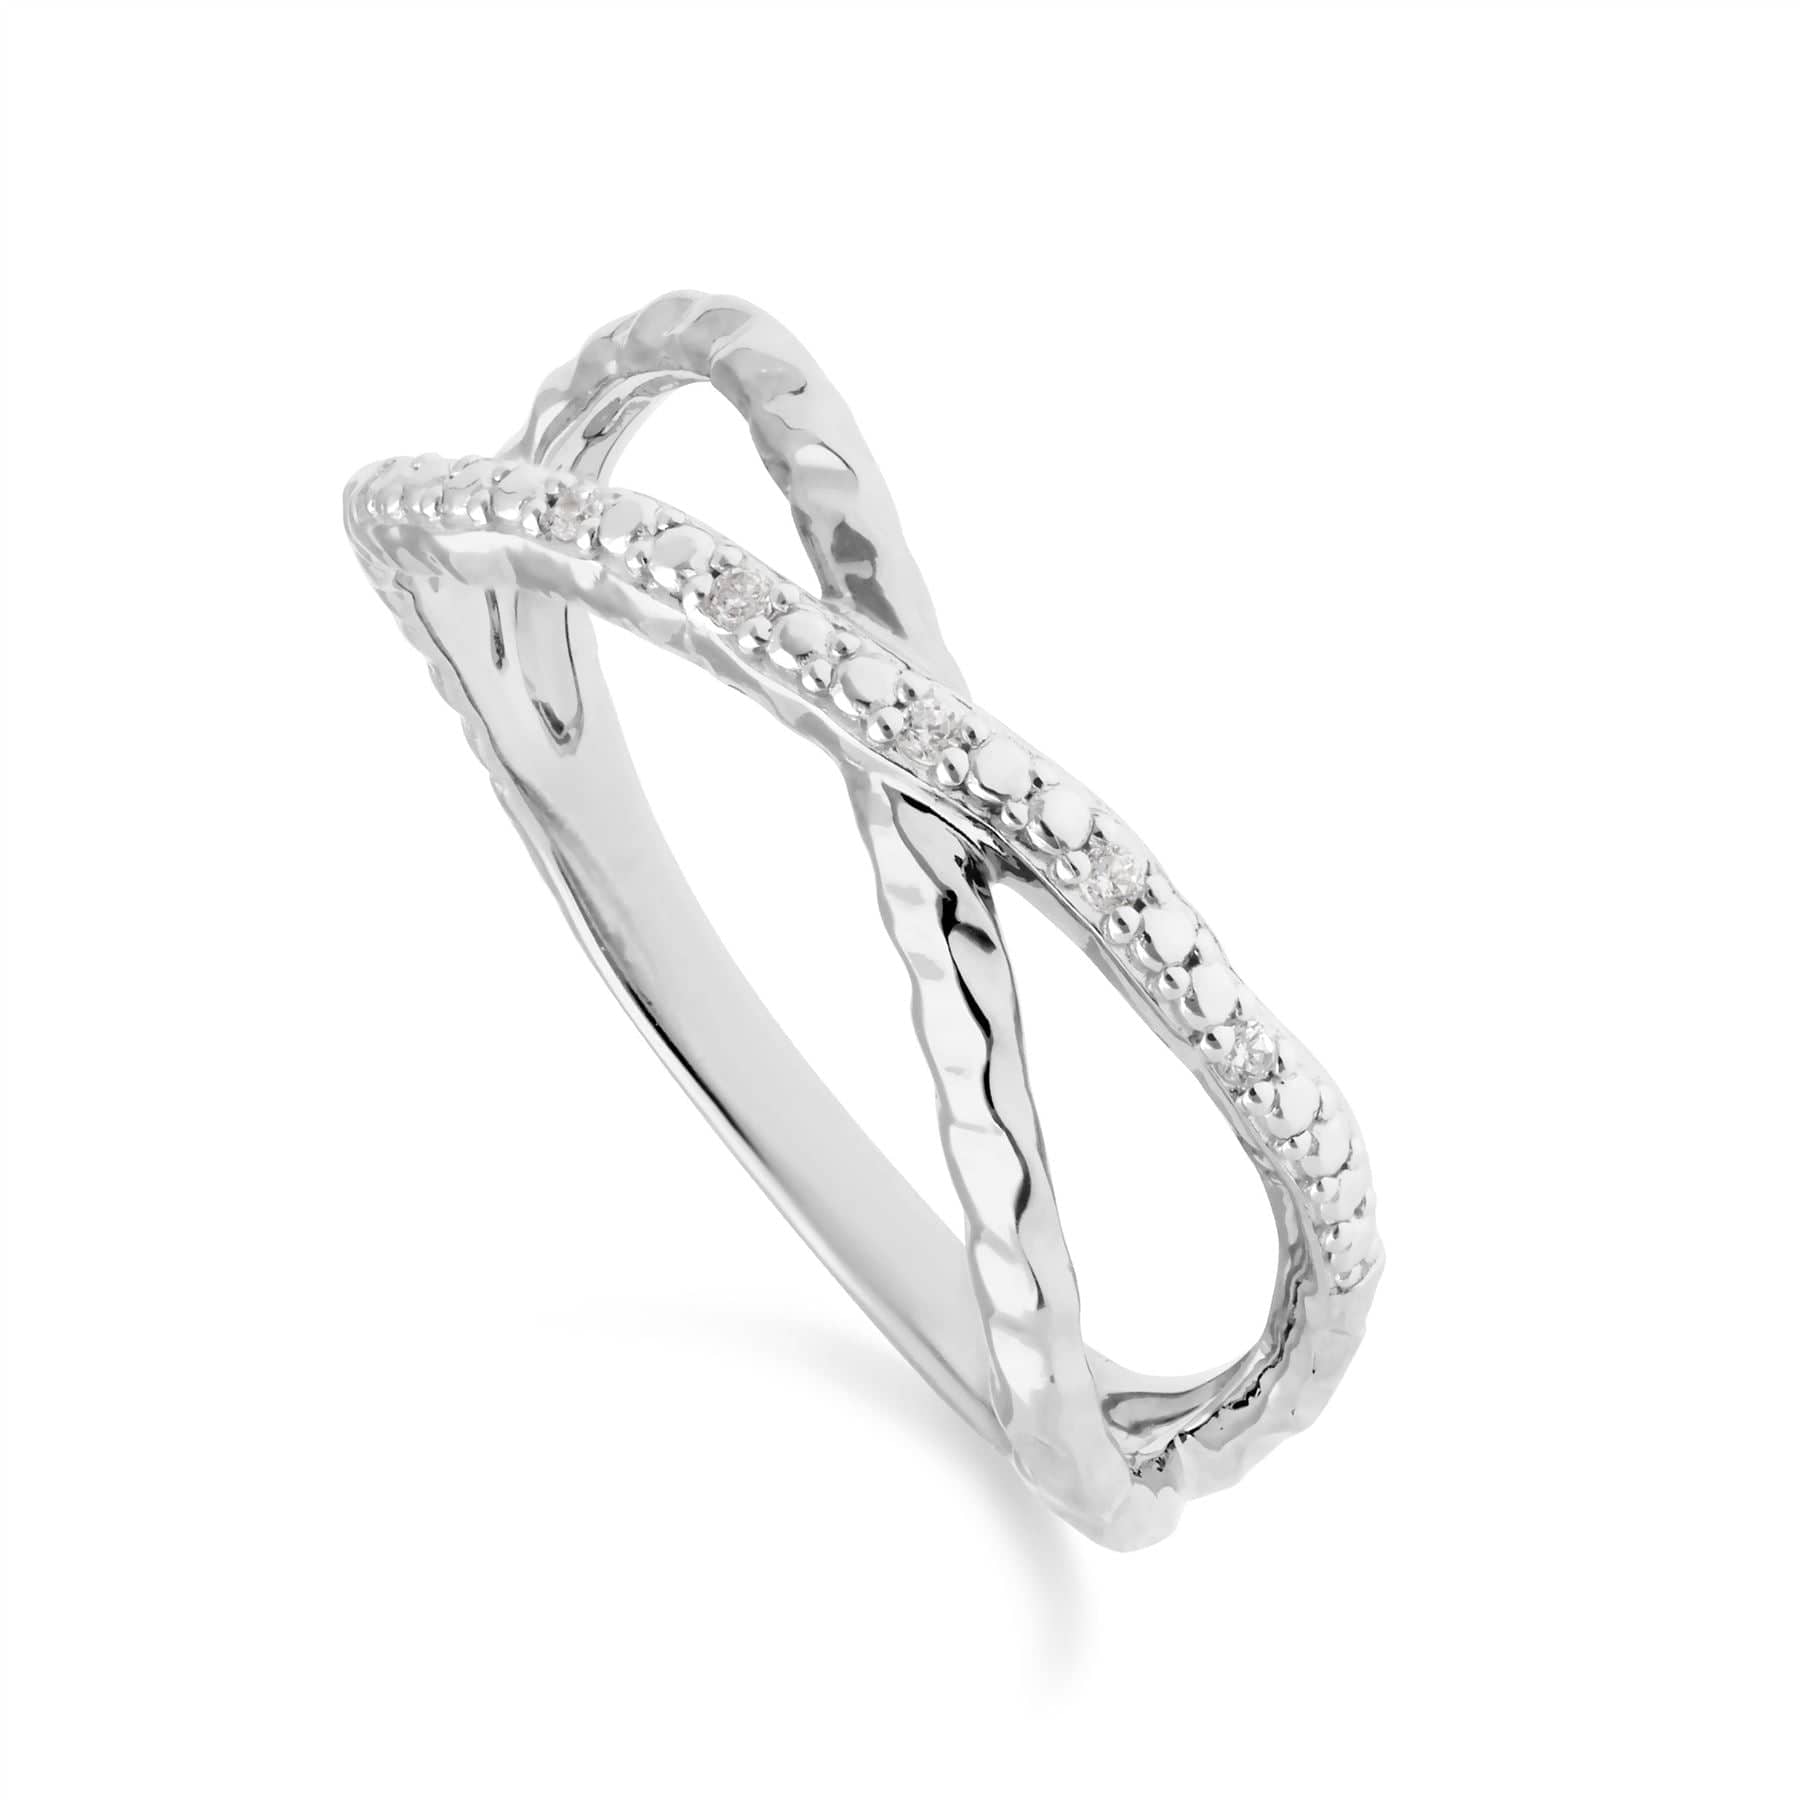 Image of Diamond Pav?? Hammered Crossover Ring in 9ct White Gold